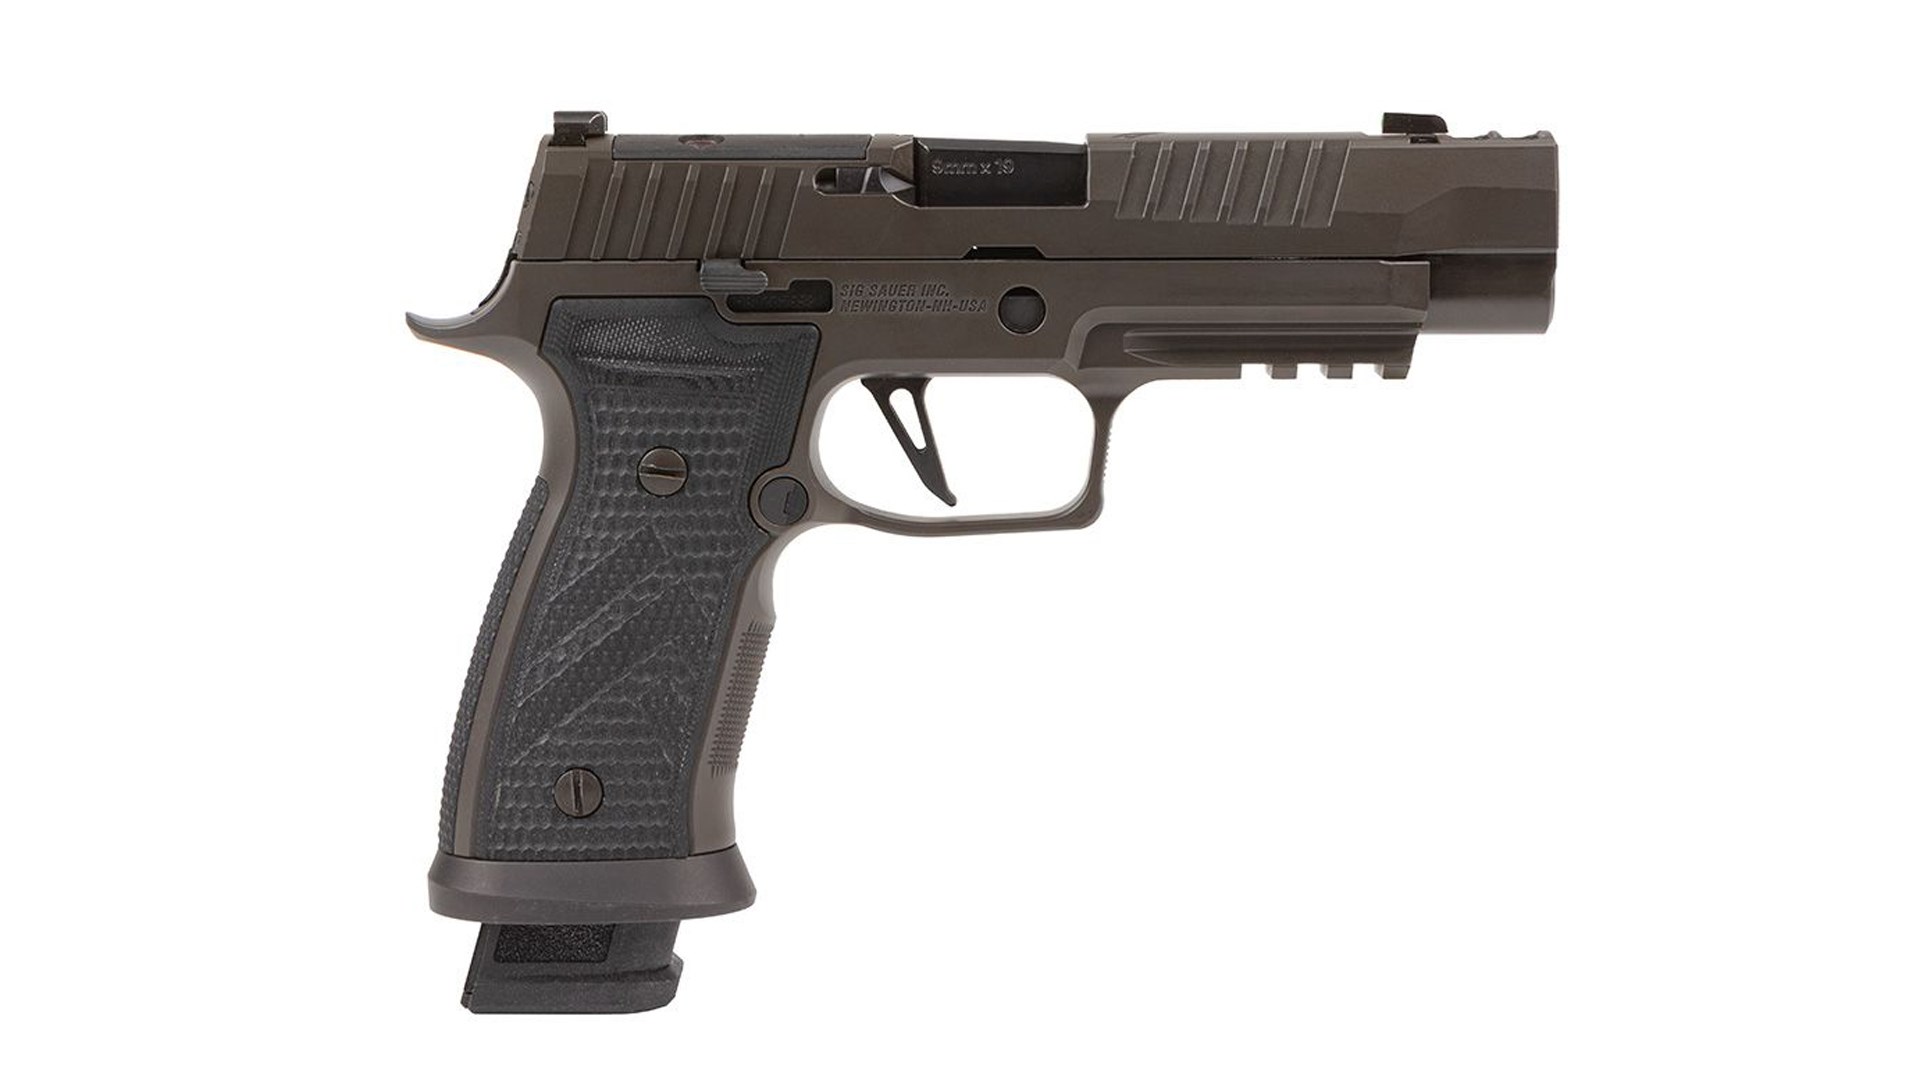 Right side of the SIG Sauer P320-AXG Legion pistol.